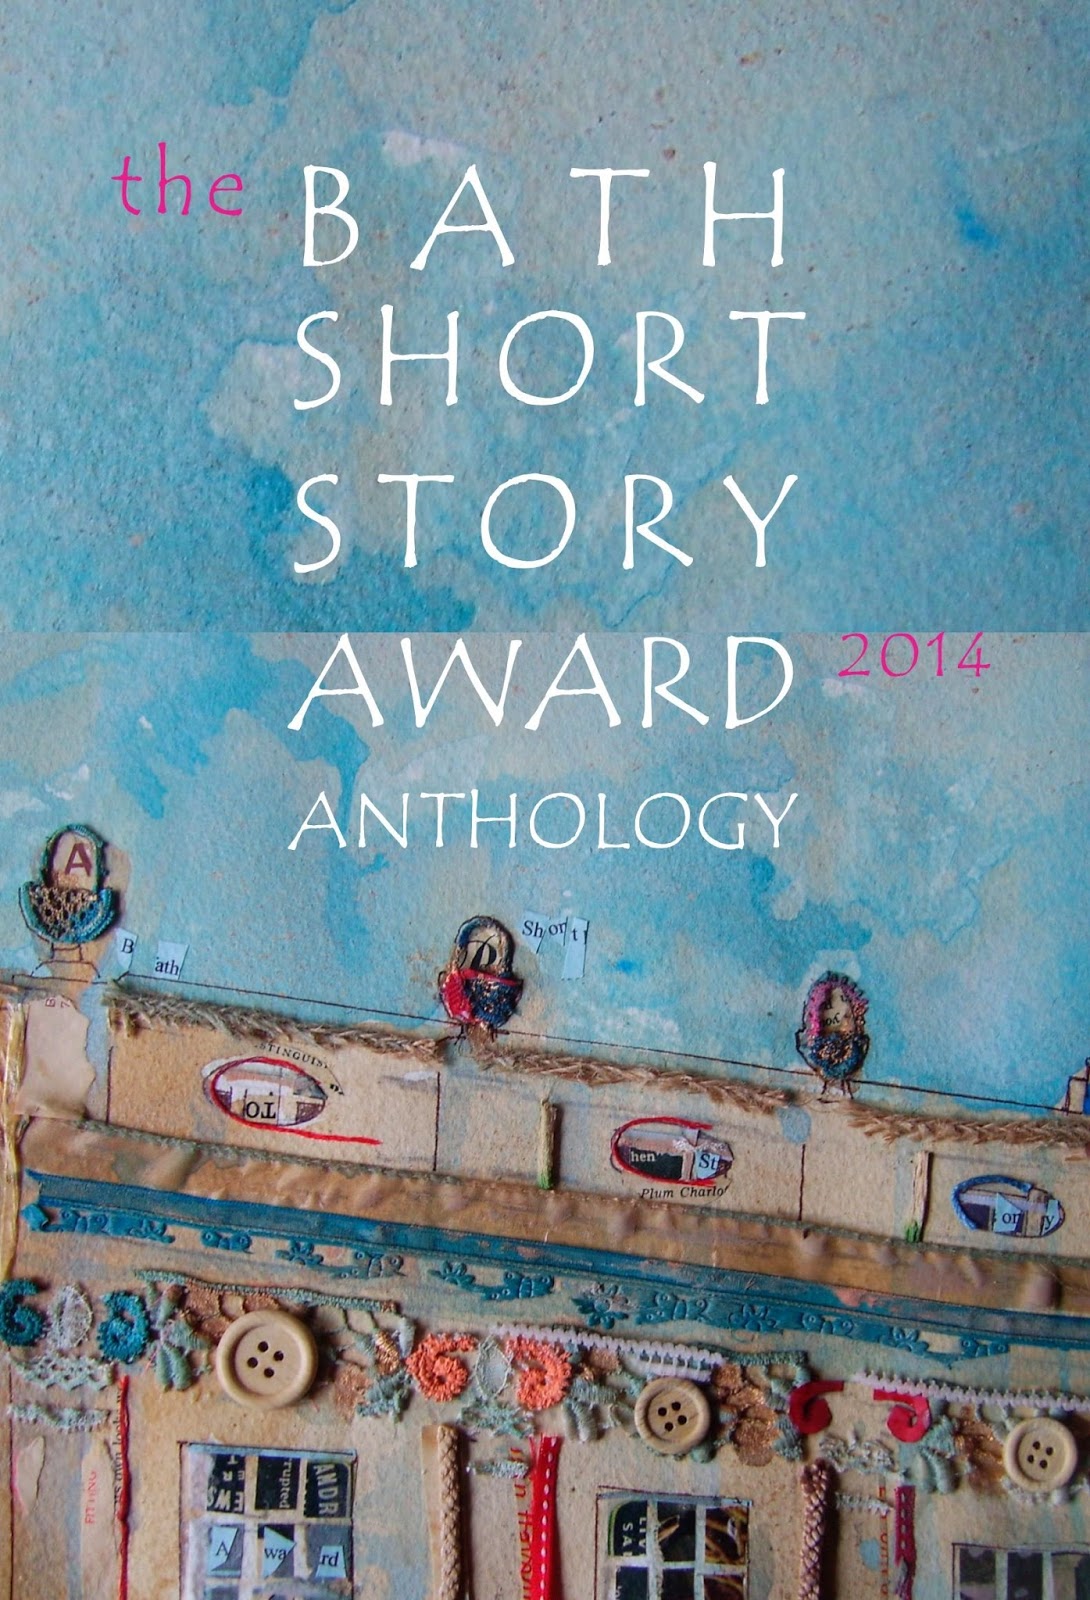 Crawl Space Interview for the Bath Short Story Award